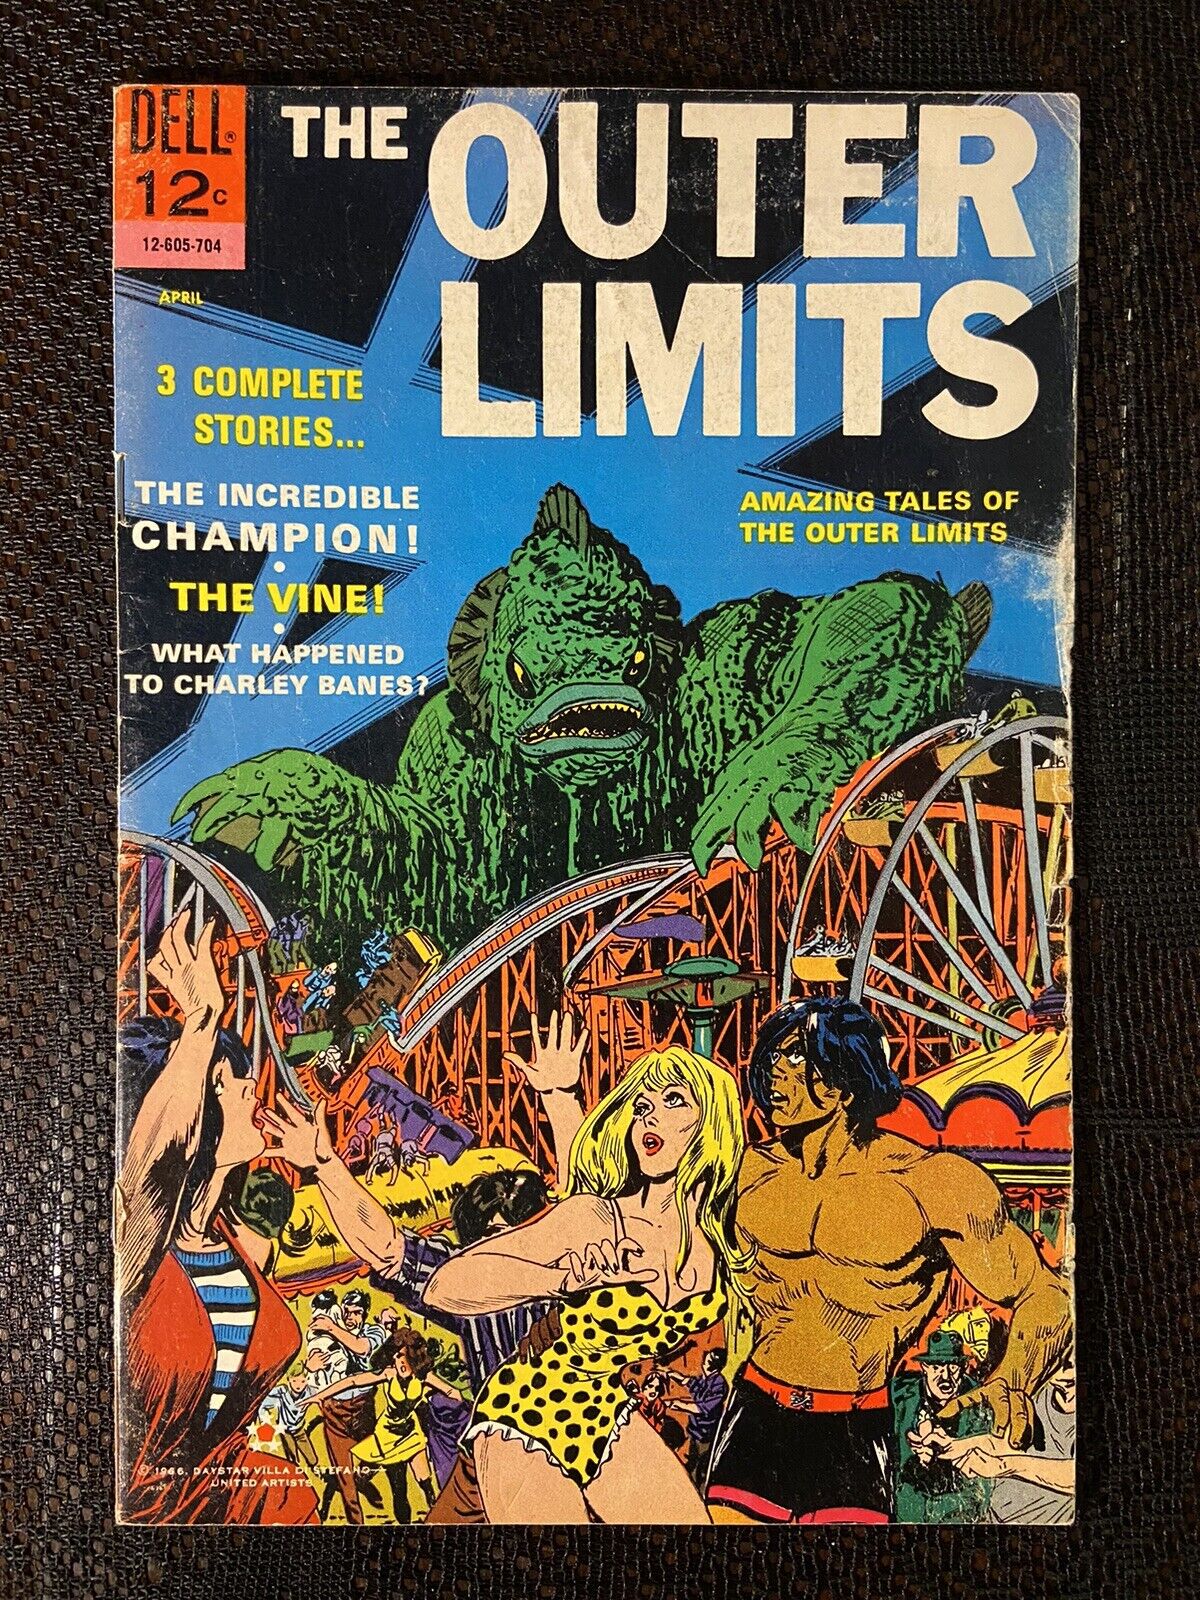 THE OUTER LIMITS #12 (1967) SILVER AGE SCI-Fi BASED ON THE CLASSIC TV SHOW